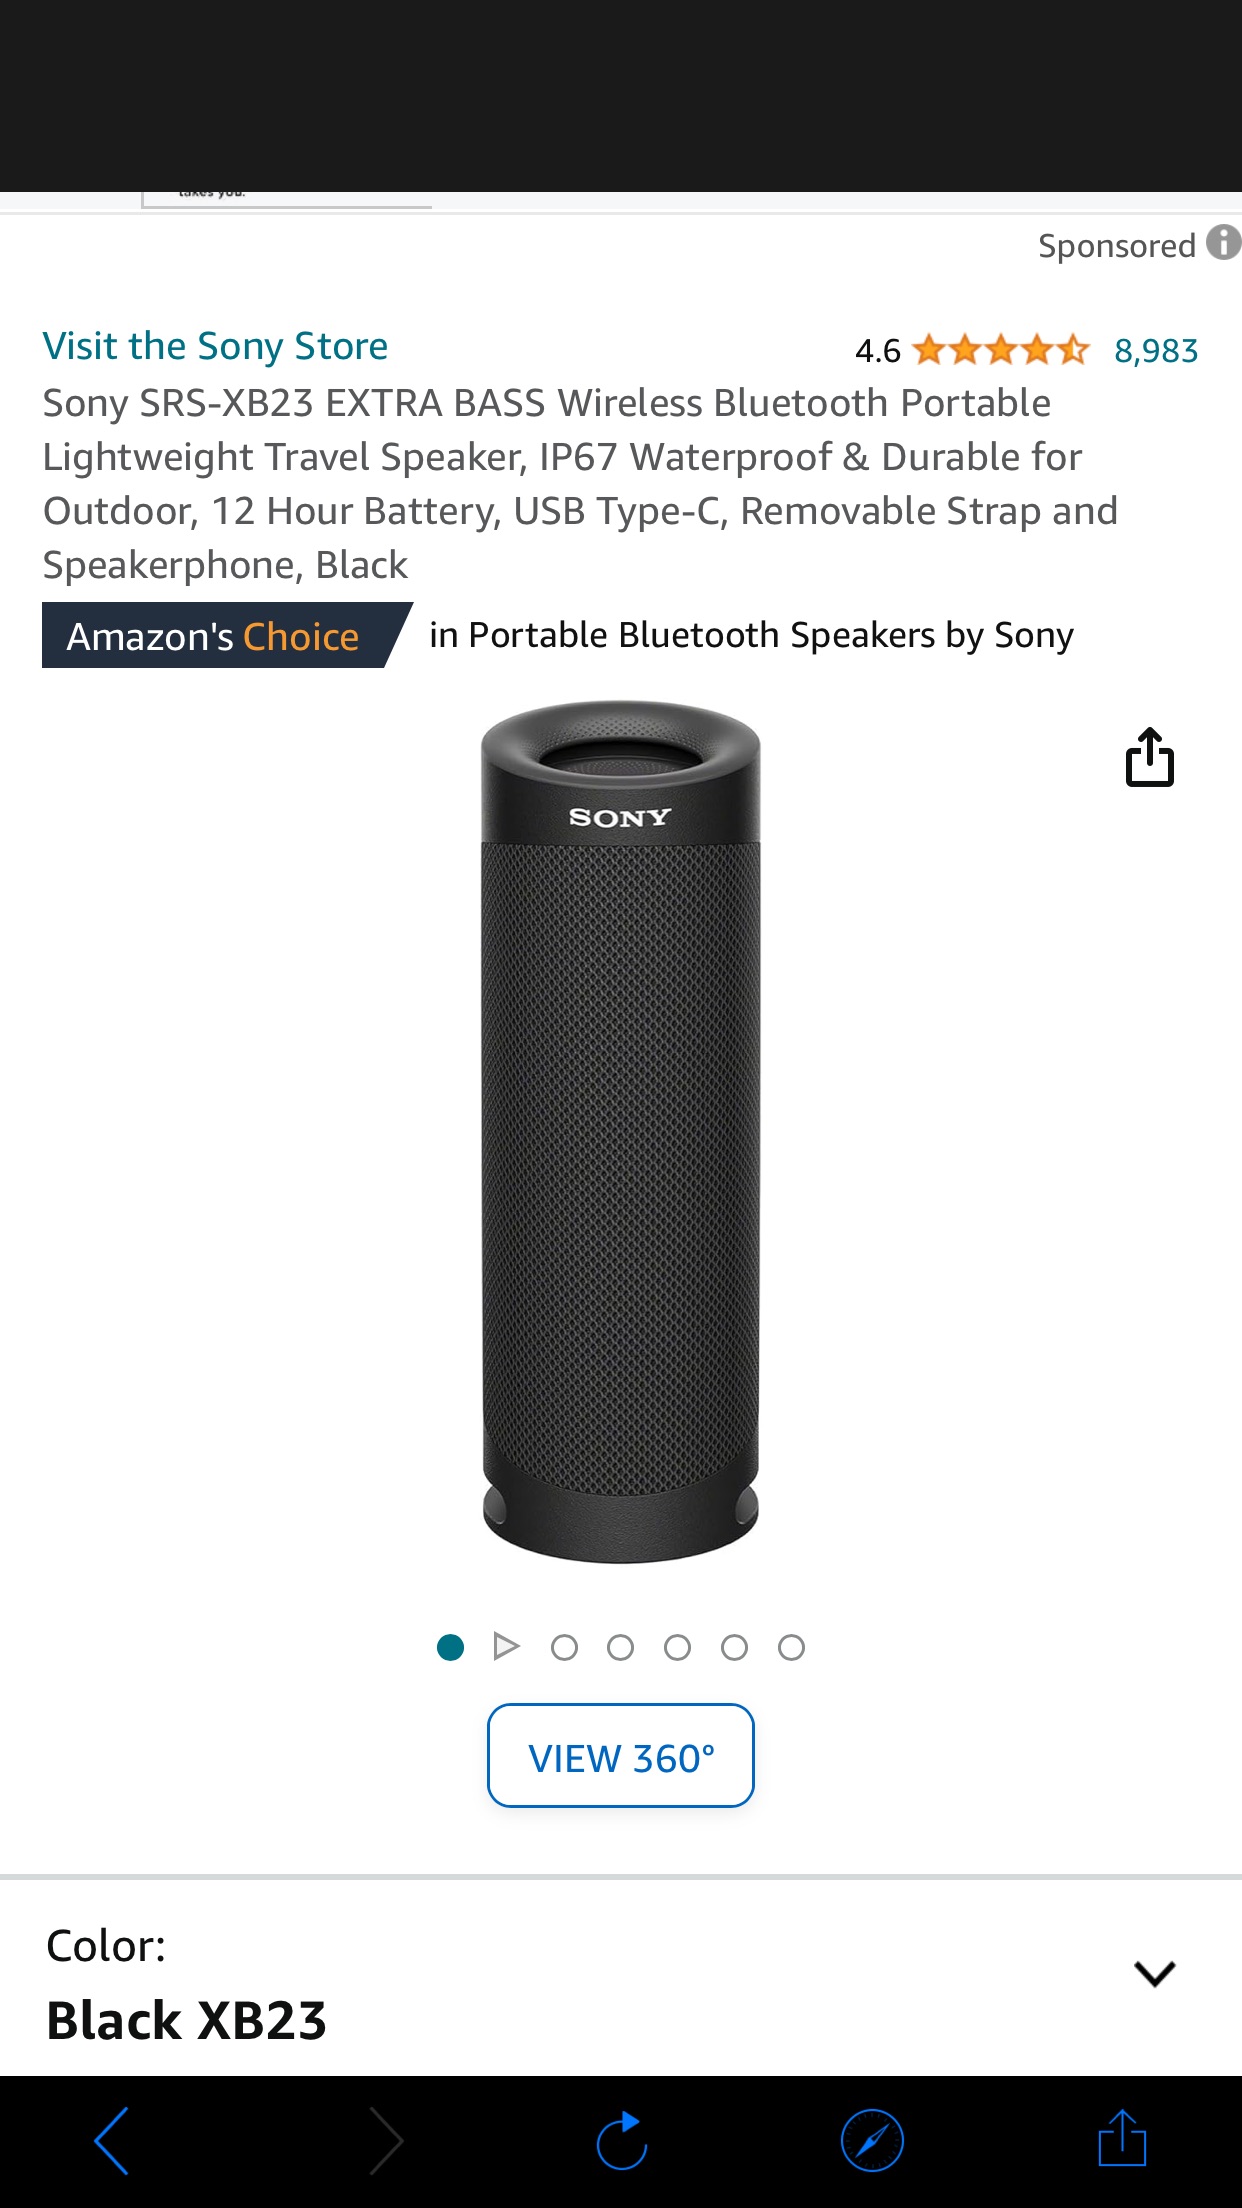 Amazon.com: Sony SRS-XB23 EXTRA BASS Wireless Bluetooth Portable Lightweight Travel Speaker, IP67 Waterproof & Durable for Outdoor, 12 Hour Battery, USB Type-C, Removable Strap and Speakerphone, Black